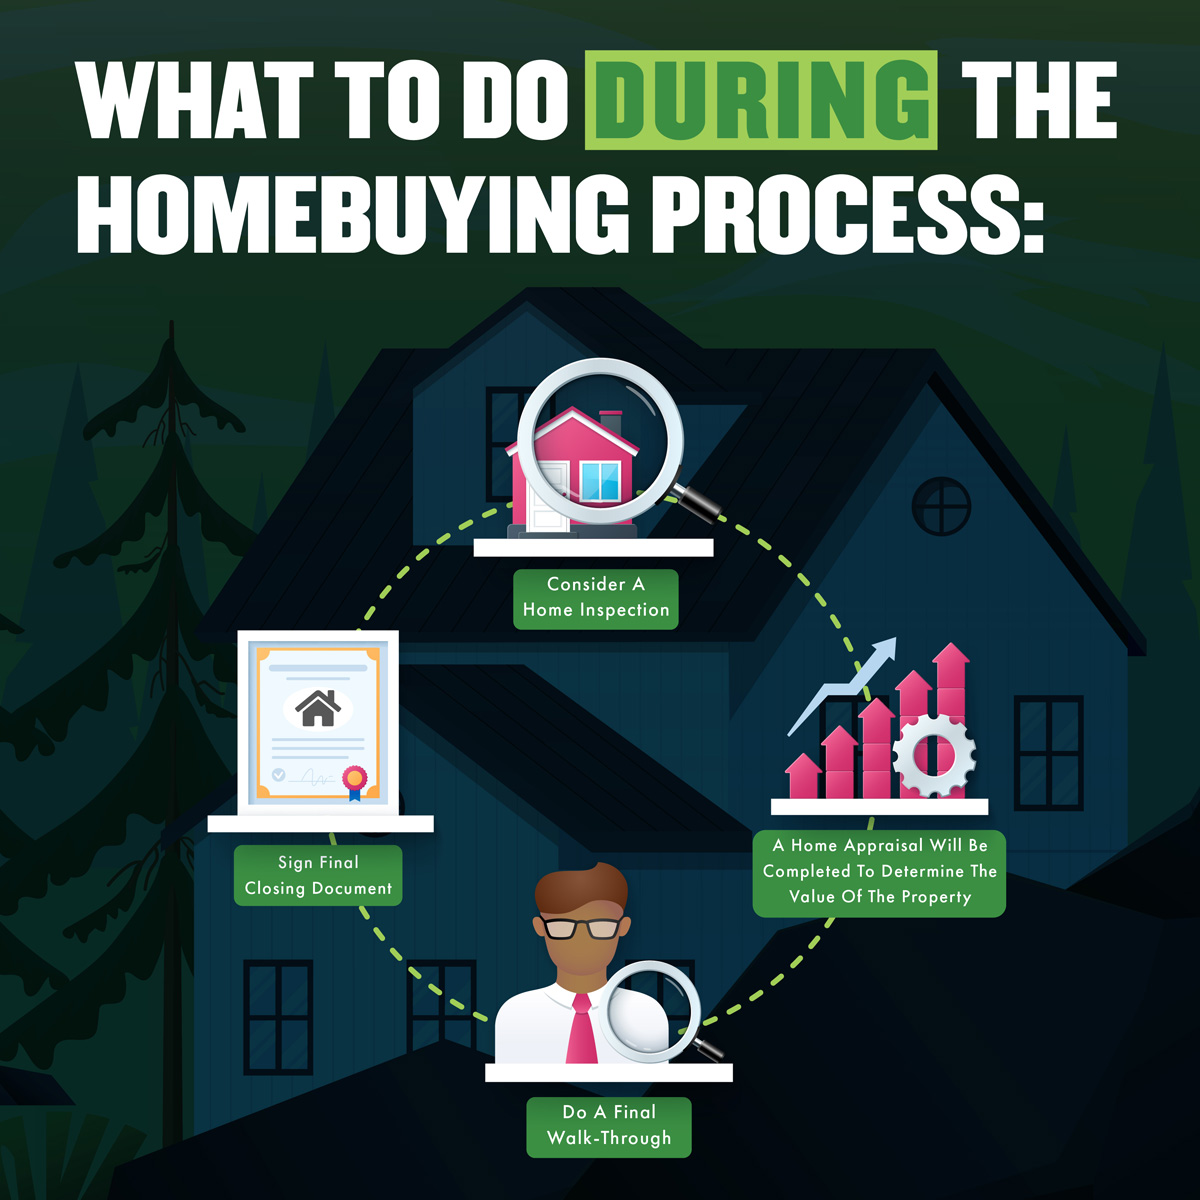 If you're buying your first home, there's a lot to keep track of and remember. Check out what you should expect in the middle of the process. Call me if you have any questions! 
.
#RealEstate #santaclarita #SCV #santaclaritaHomes #scvrealestate #santaclaritarealestate